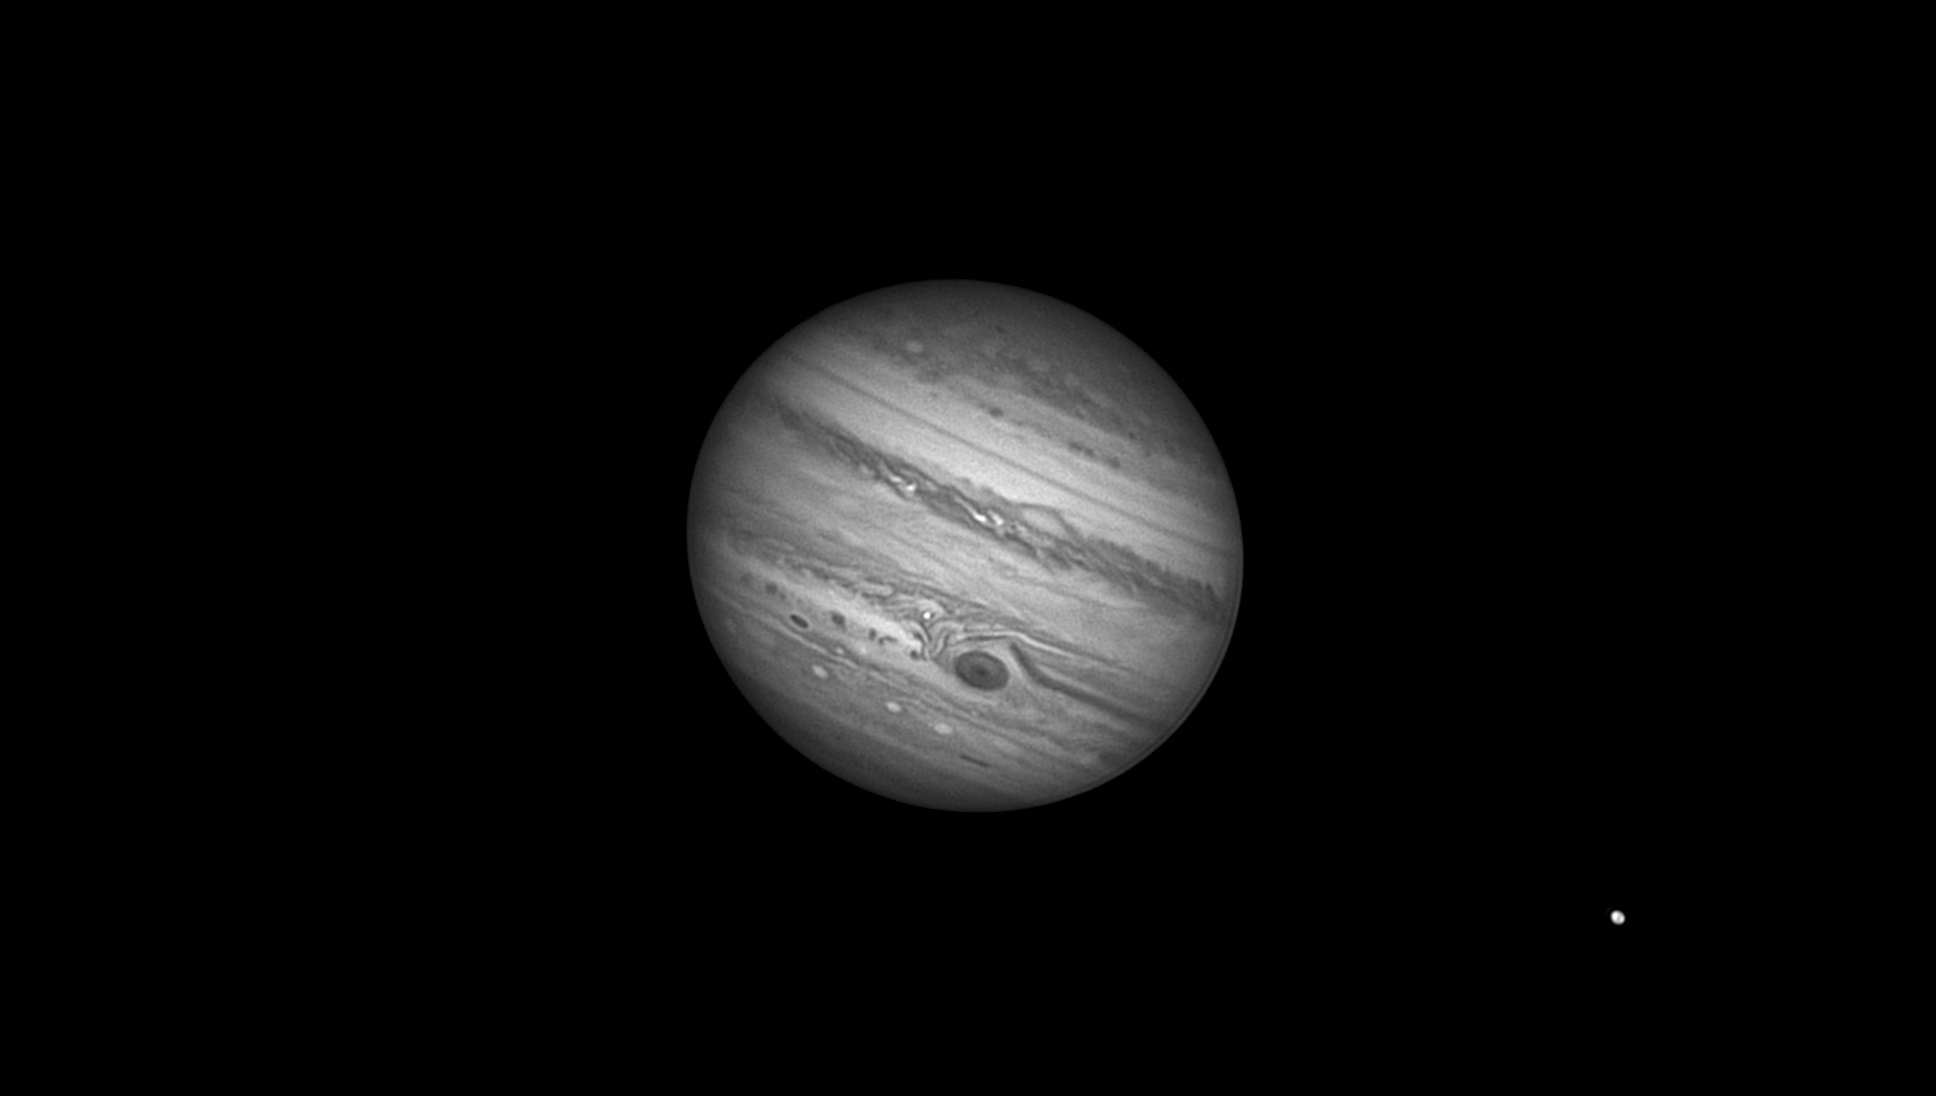 6385342a87f09_2022-10-11-2234_7-G-Jupiter_lapl5_ap509_WDg2.png.2a85d25c7d7396148b95c45b0aaf82f5.png